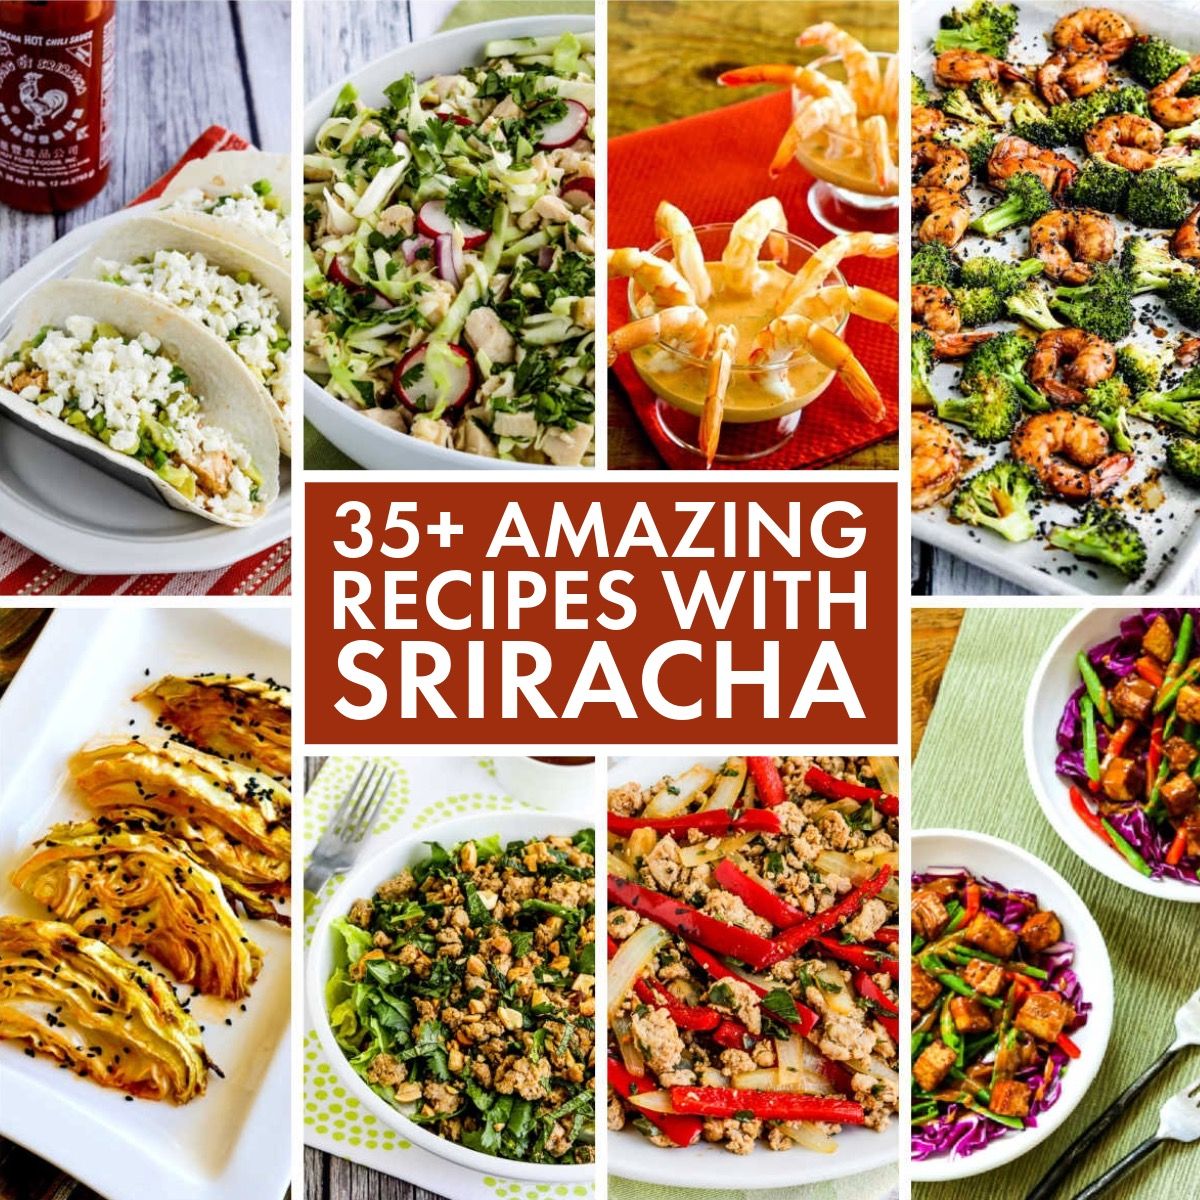 35+ Amazing Recipes with Sriracha collage of featured recipes.